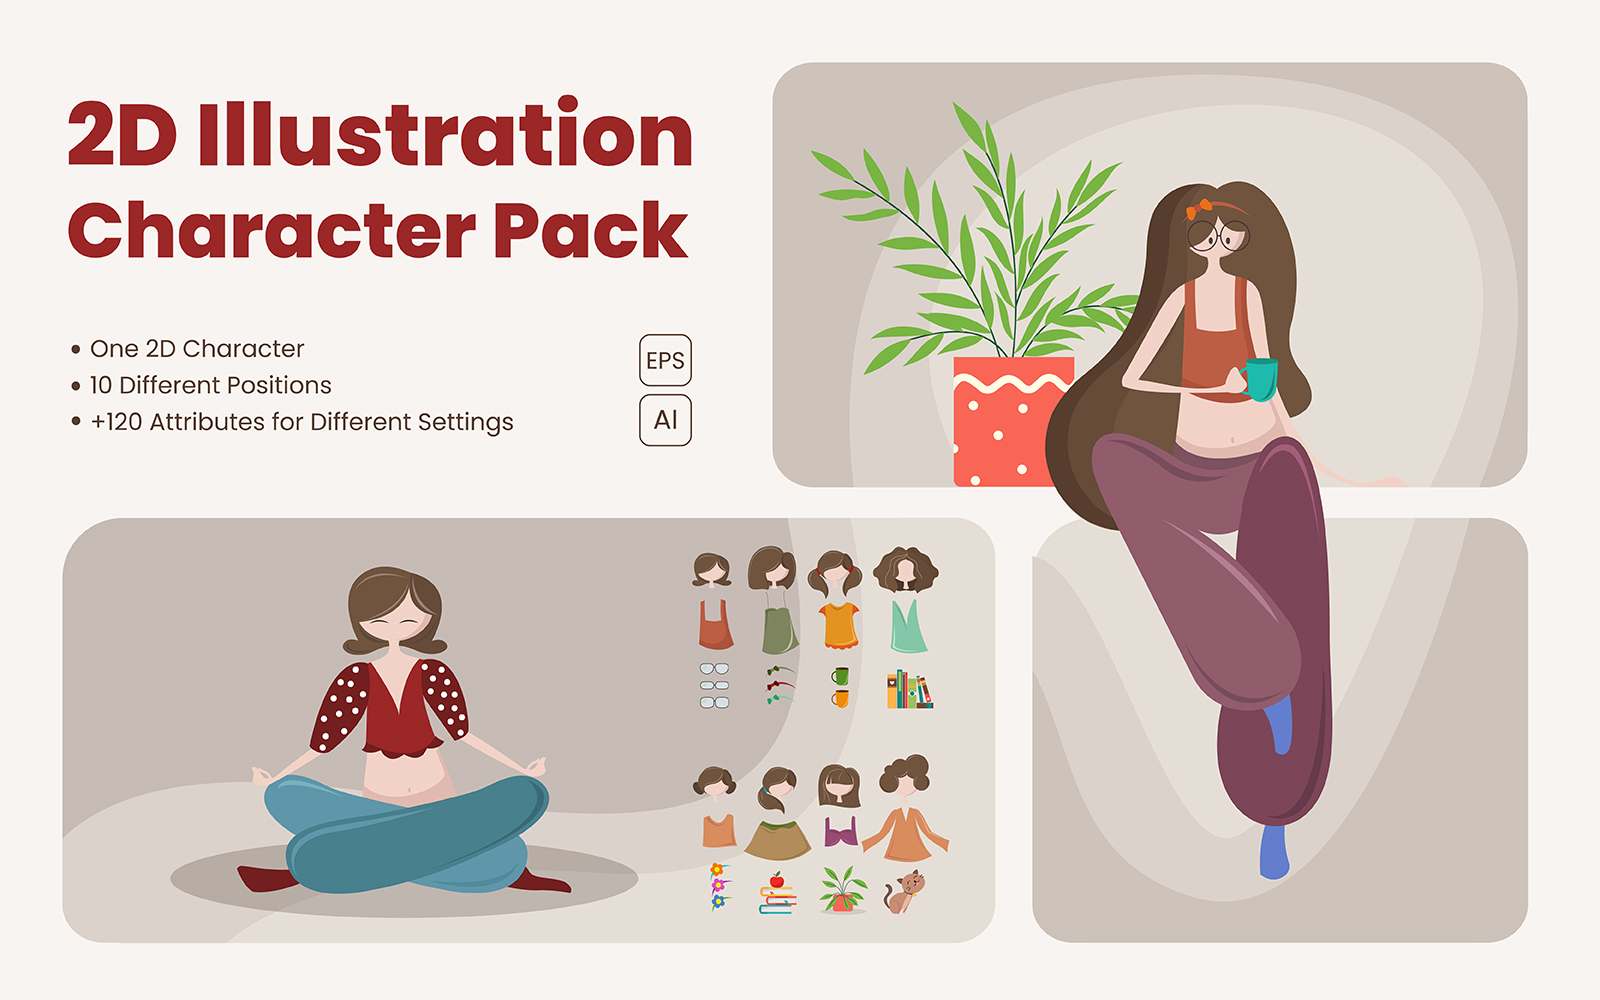 2D Illustration Character Pack